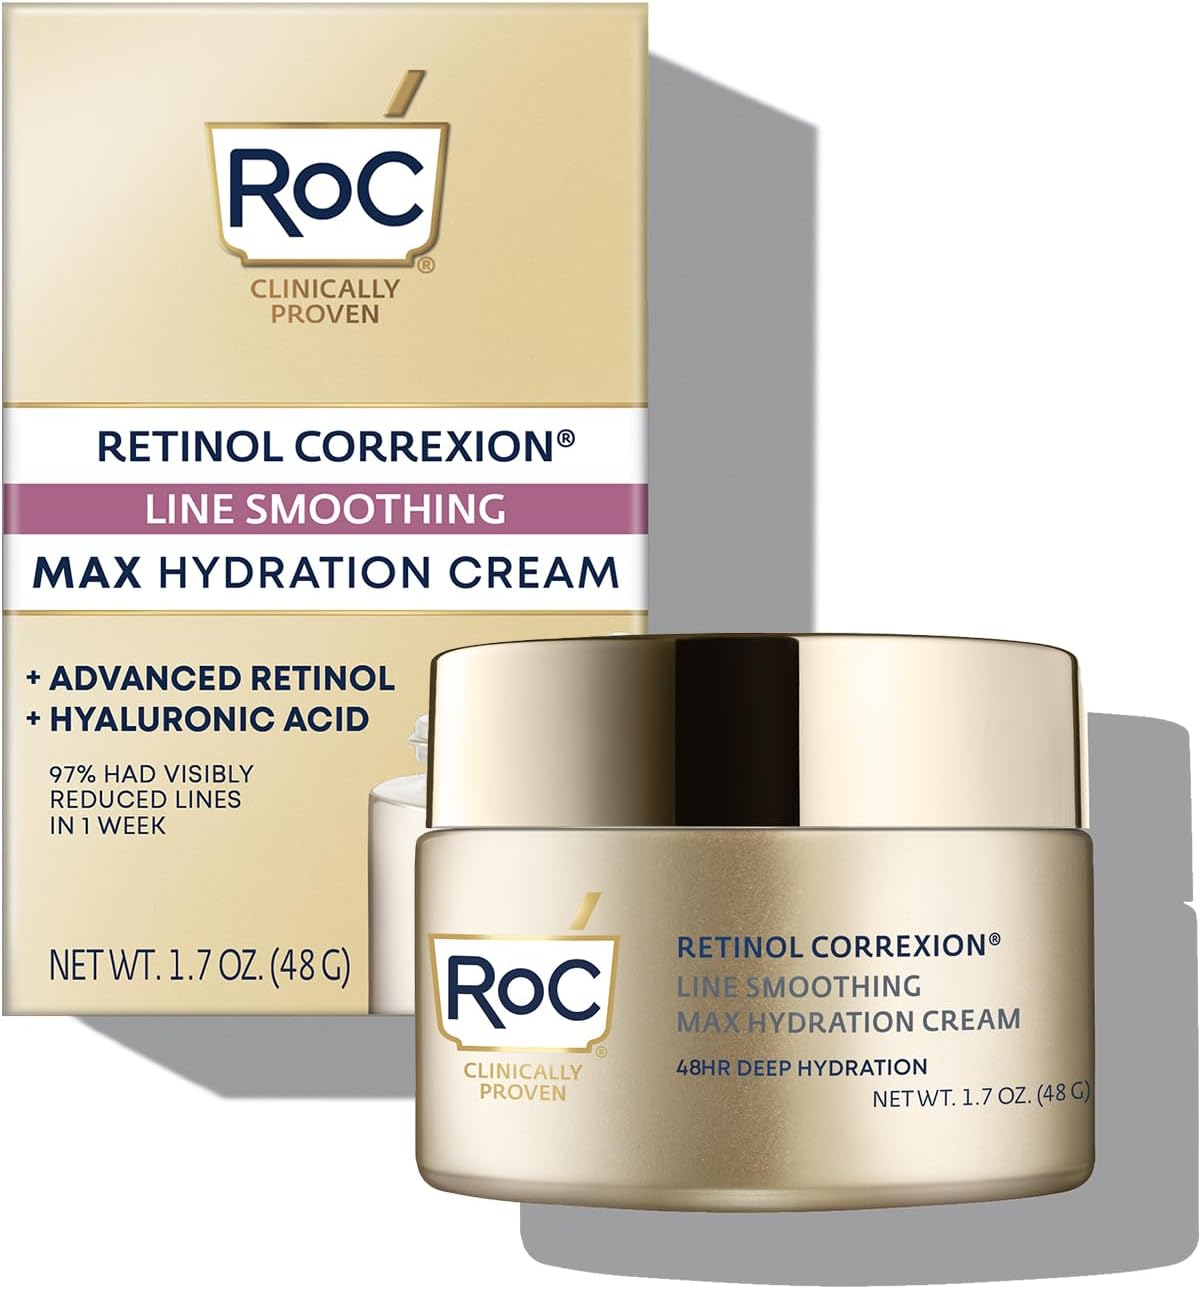 RoC Retinol Correxion Max Daily Hydration Anti-Aging Face Moisturizer with Hyaluronic Acid, Treat Fine Lines, Dark Spots, Post-Acne Scars, Oil Free, Stocking Stuffers, 1.7 Ounces (Packaging May Vary)